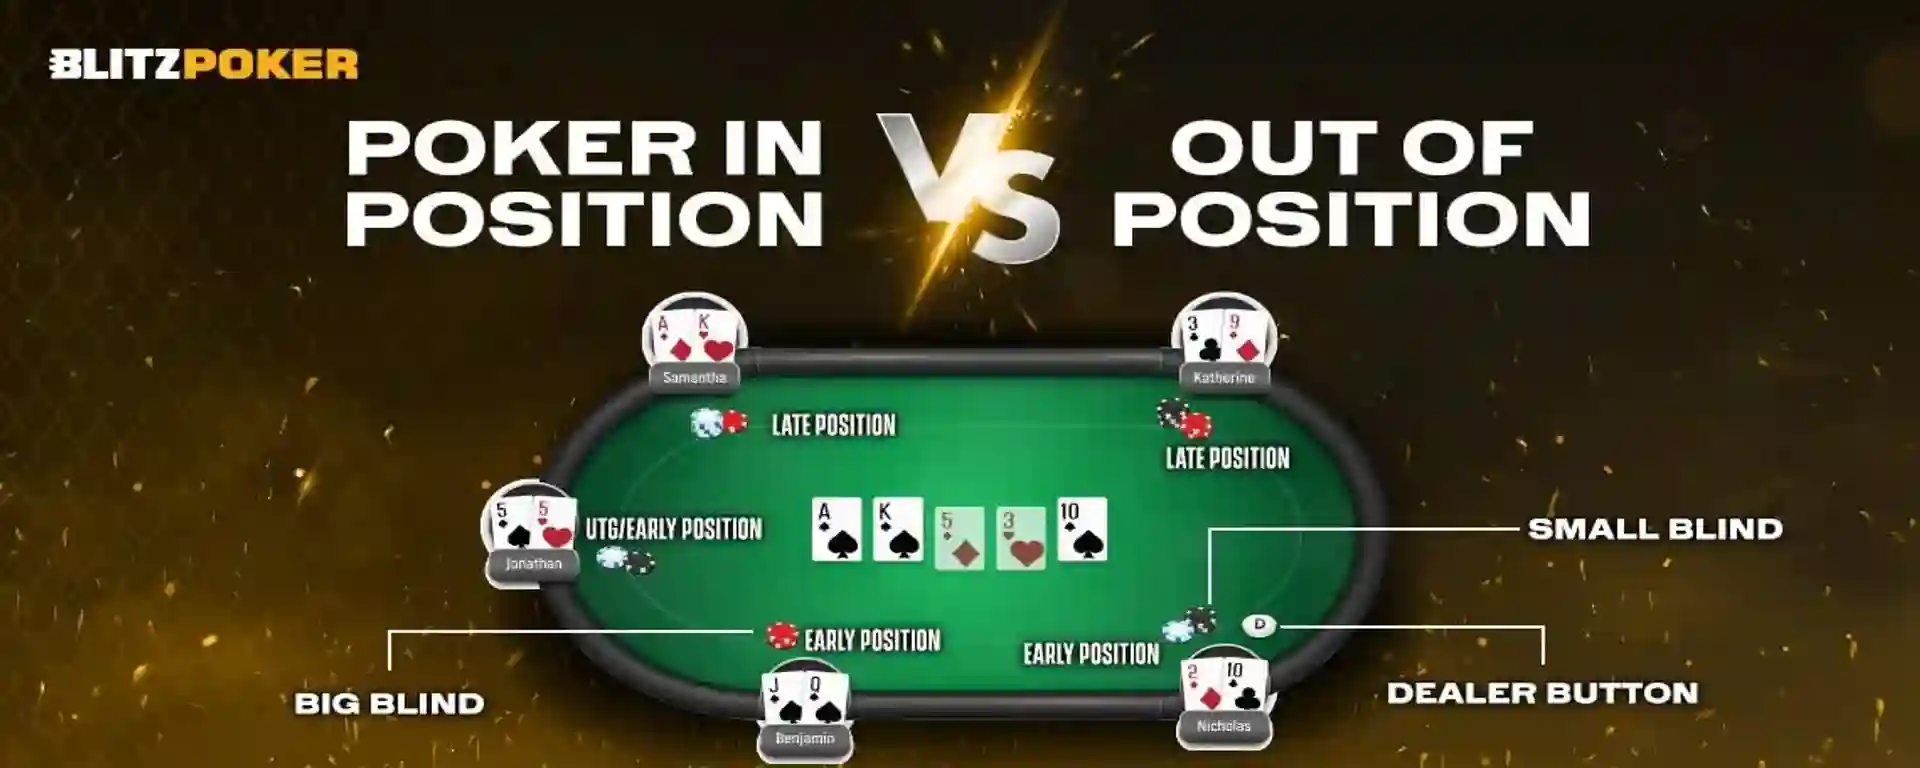 Poker In Position vs Out of Position